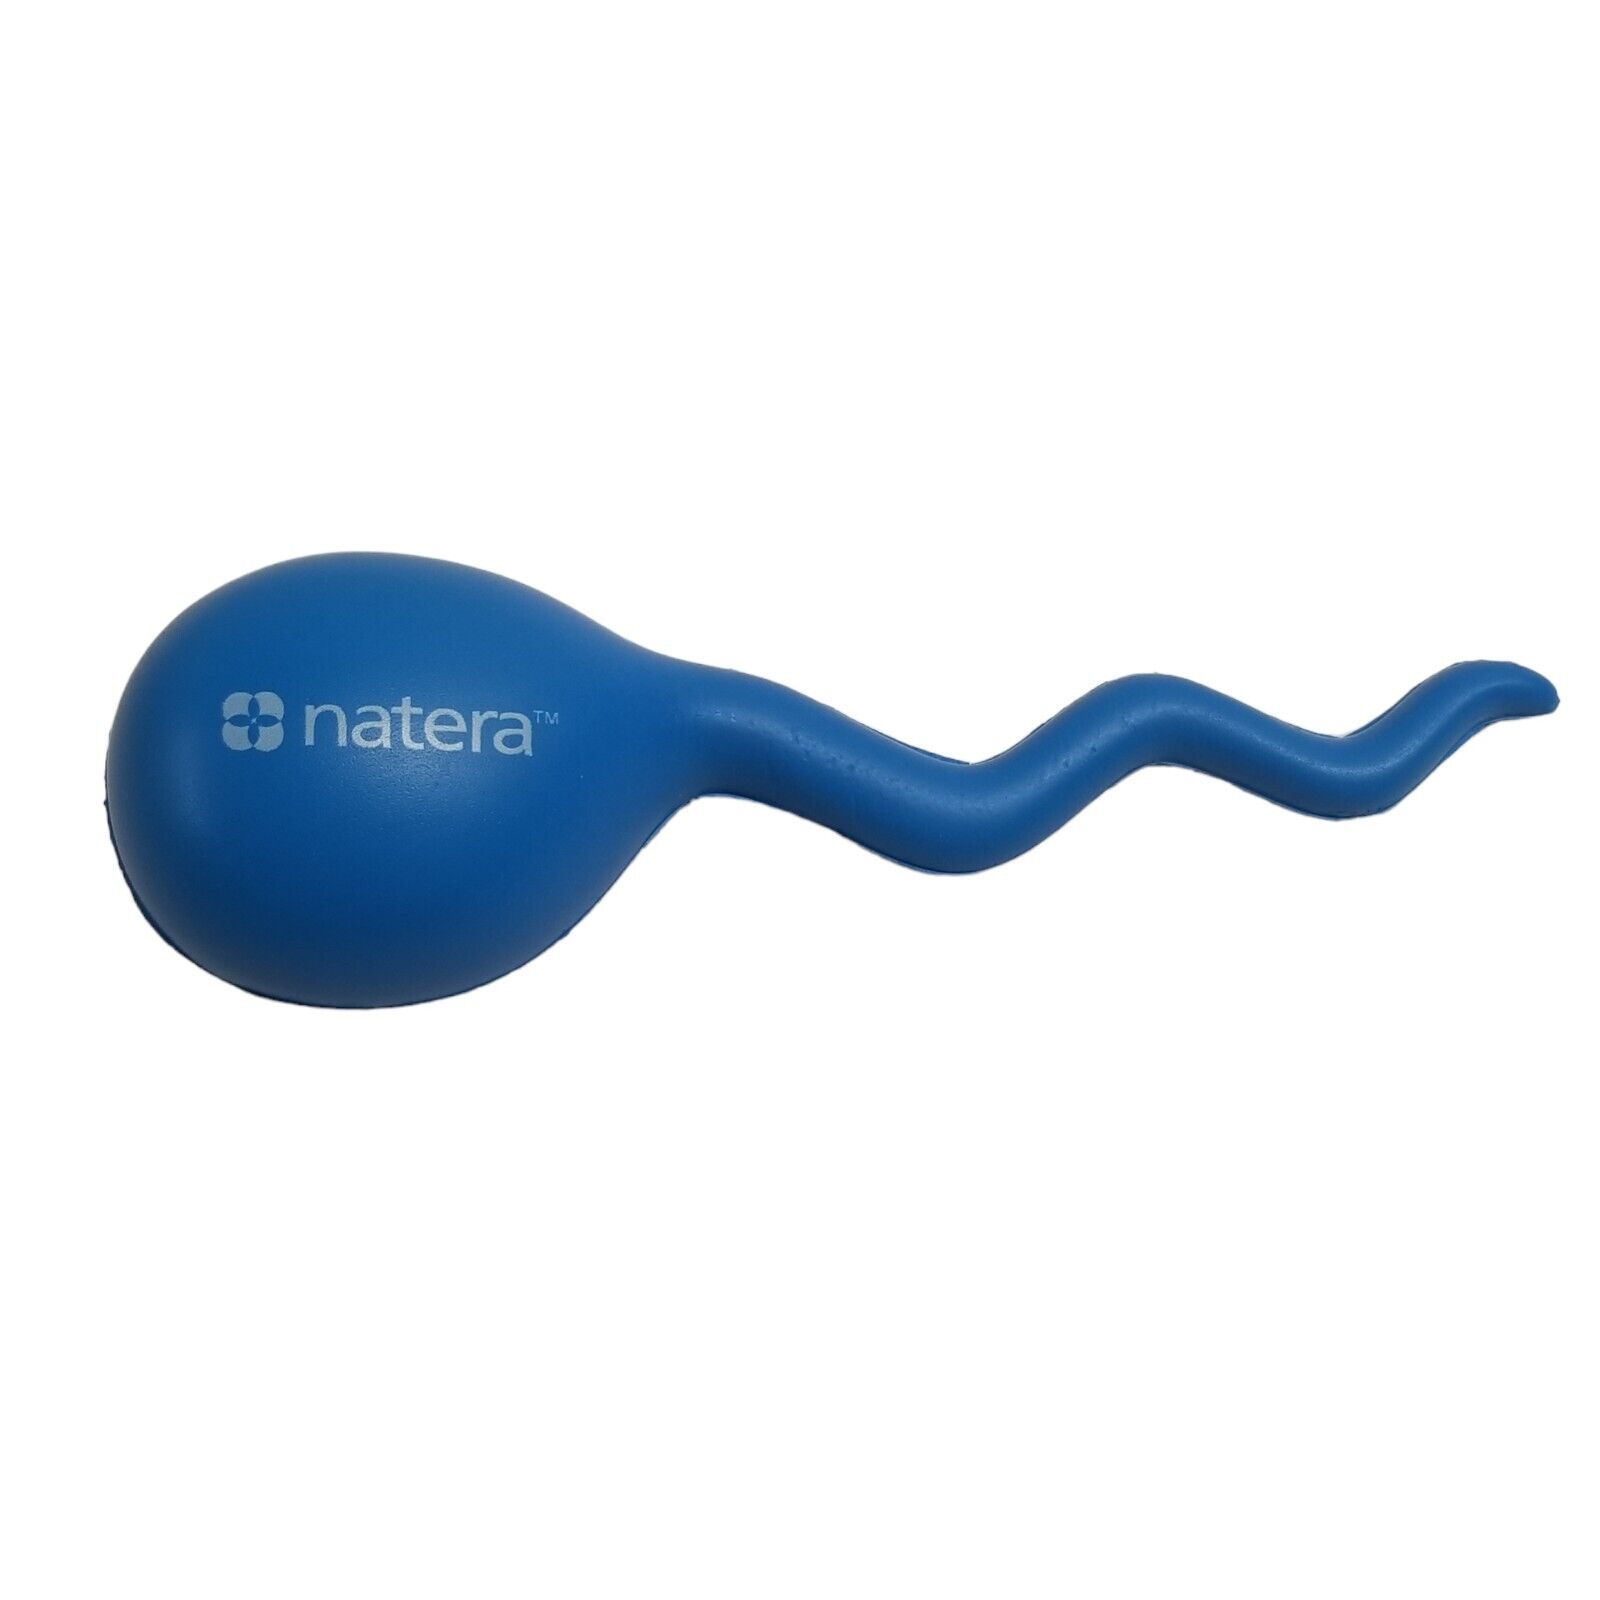 Natera Medical Rep Advertisement Toy Stress Ball Sperm Genetic Testing Company